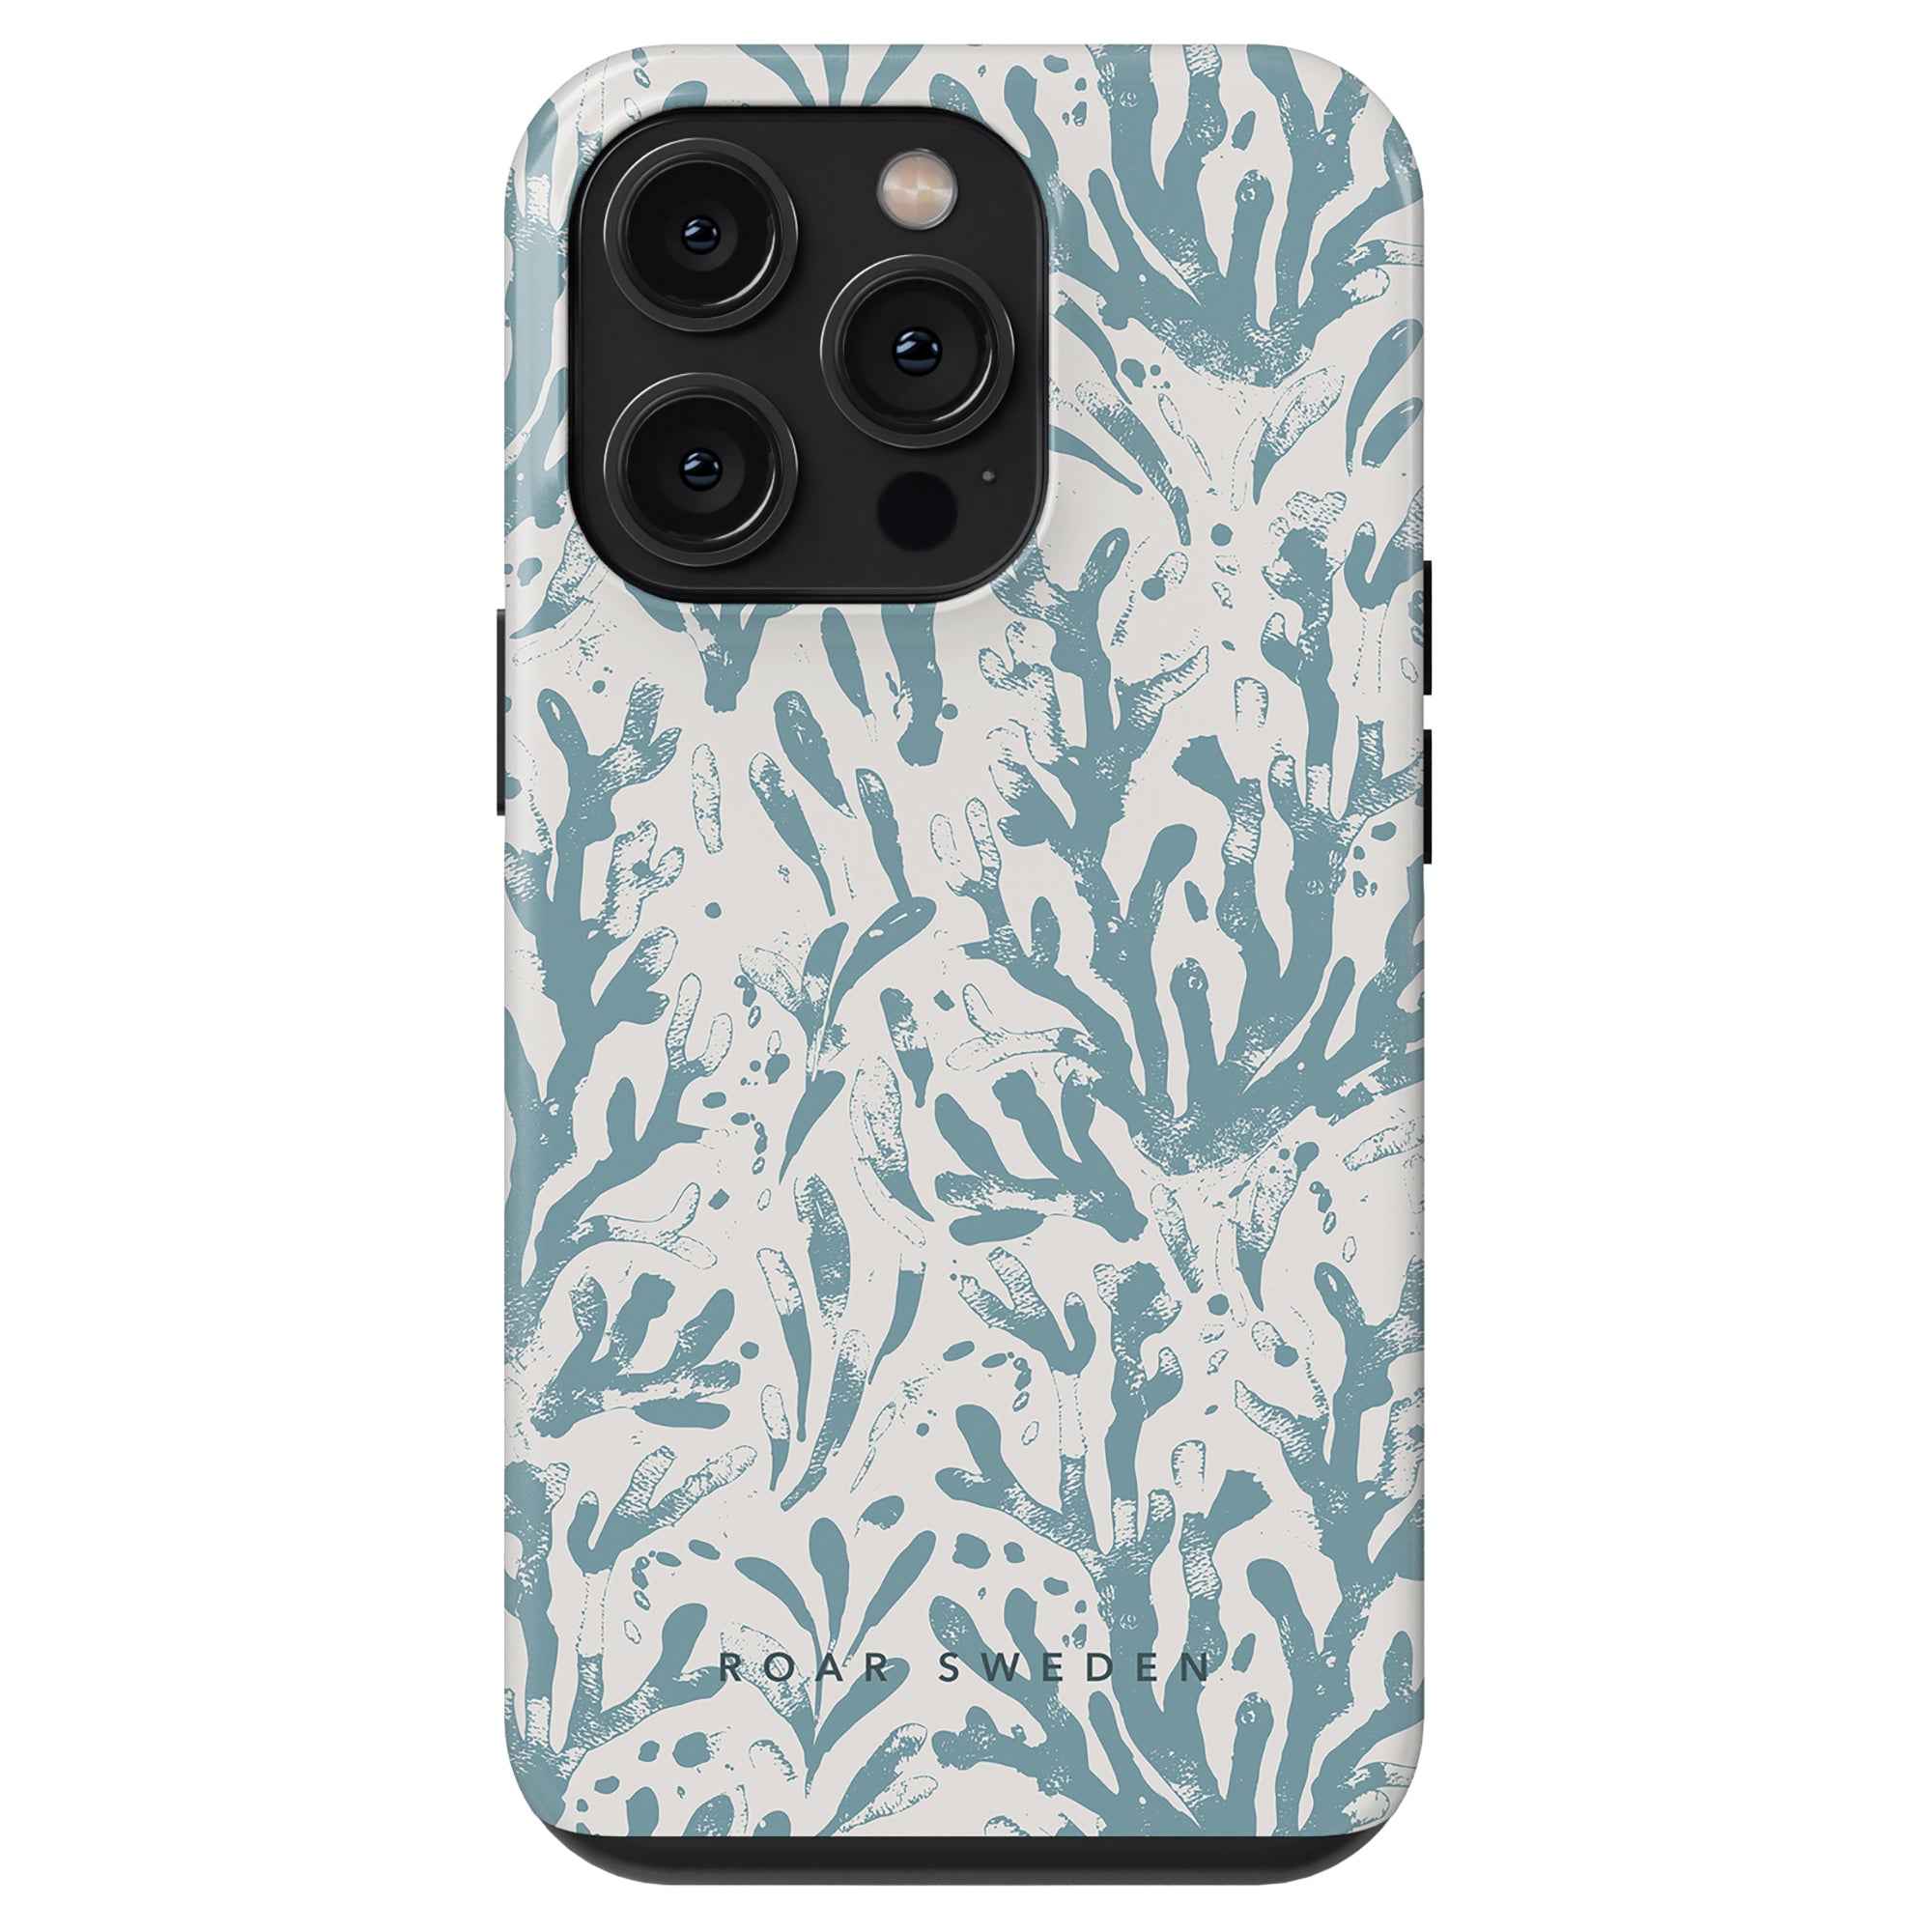 A smartphone with a Sea Life - Tough Case design from the ocean collection.